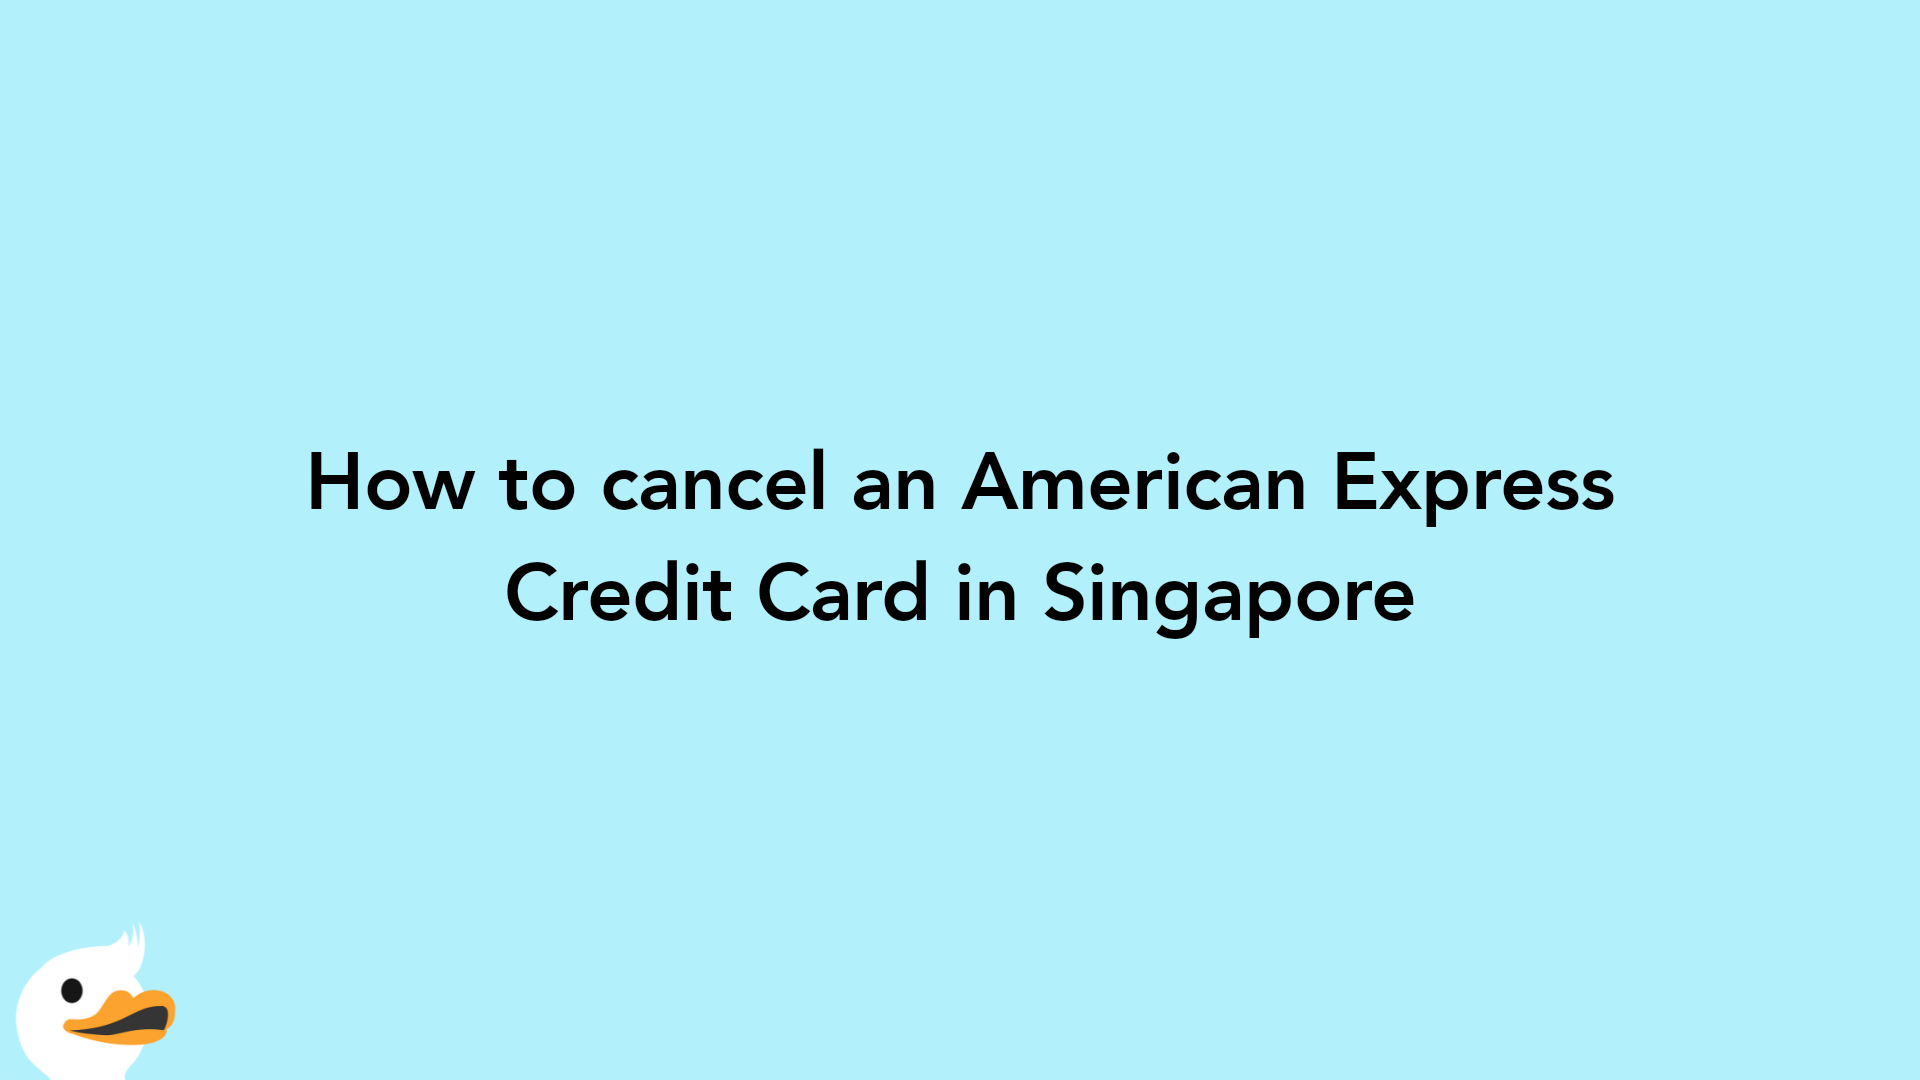 How to cancel an American Express Credit Card in Singapore